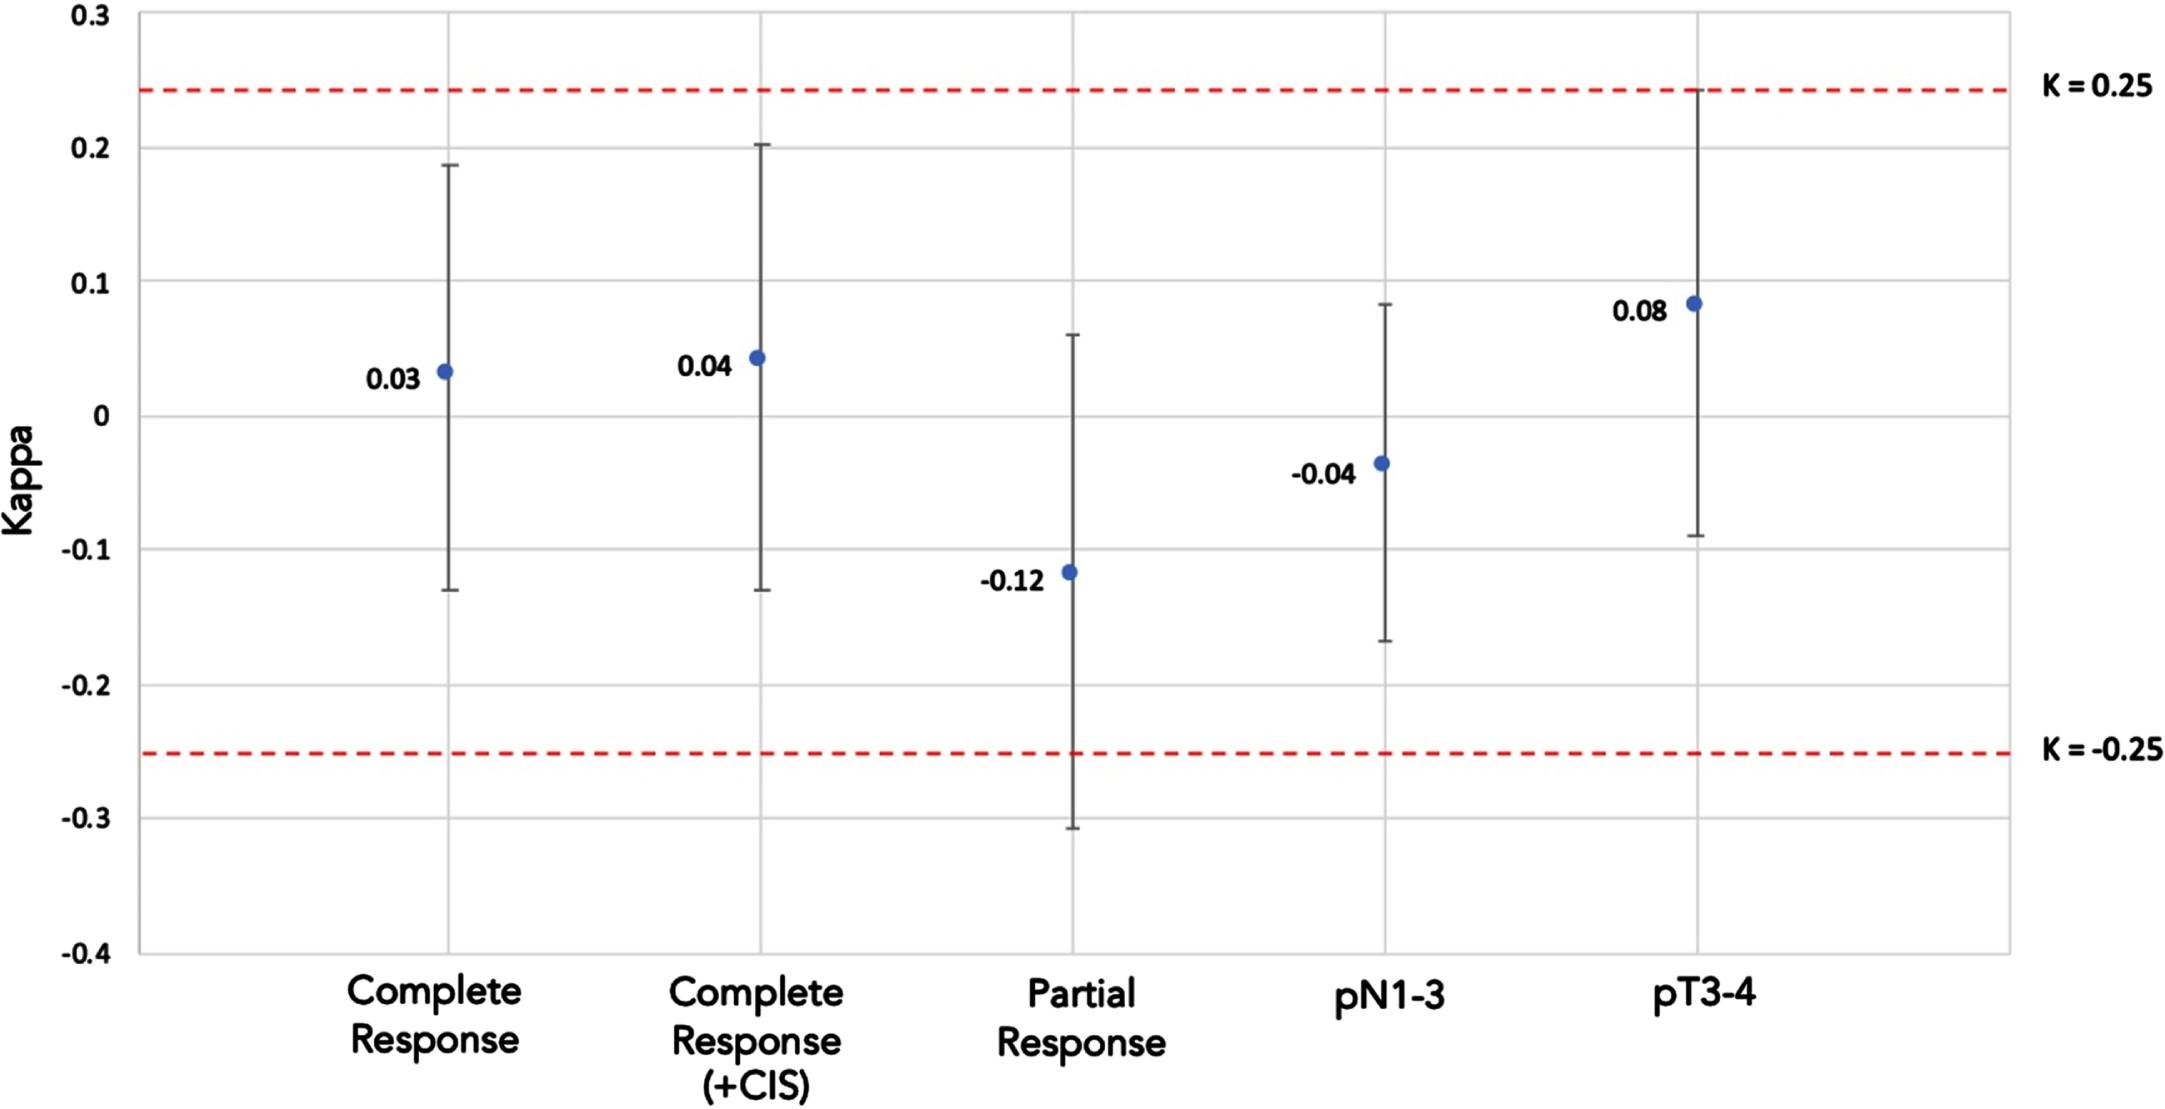 Correlation between radiographic and pathologic findings based on Cohen’s Kappa Coefficient. 95% confidence intervals are represented by solid lines. Dashed red lines delineate outer boundary for values corresponding to poor agreement (k = –0.25–0.25).